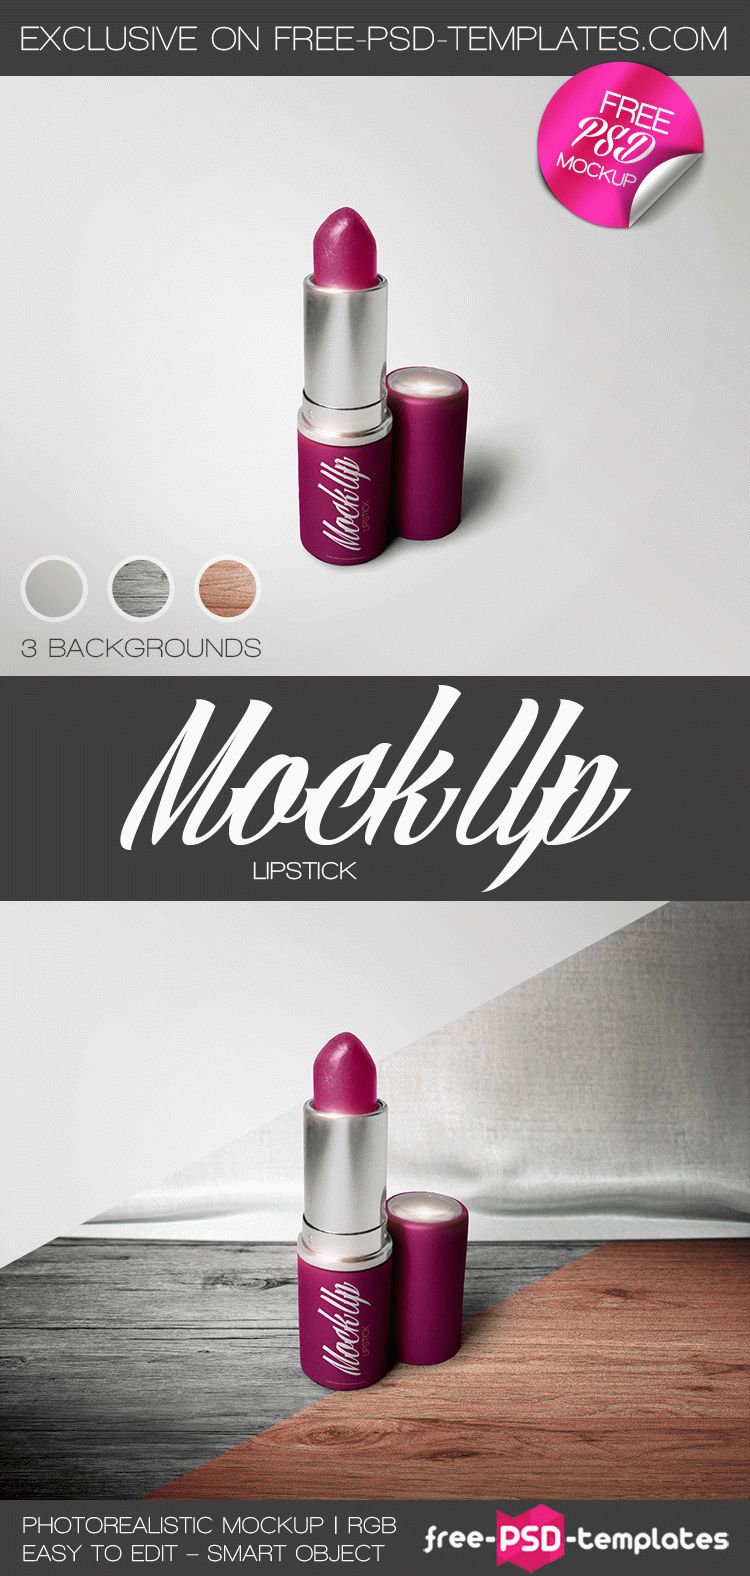 Download Free Lipstick Mock-up in PSD | Free PSD Templates PSD Mockup Templates